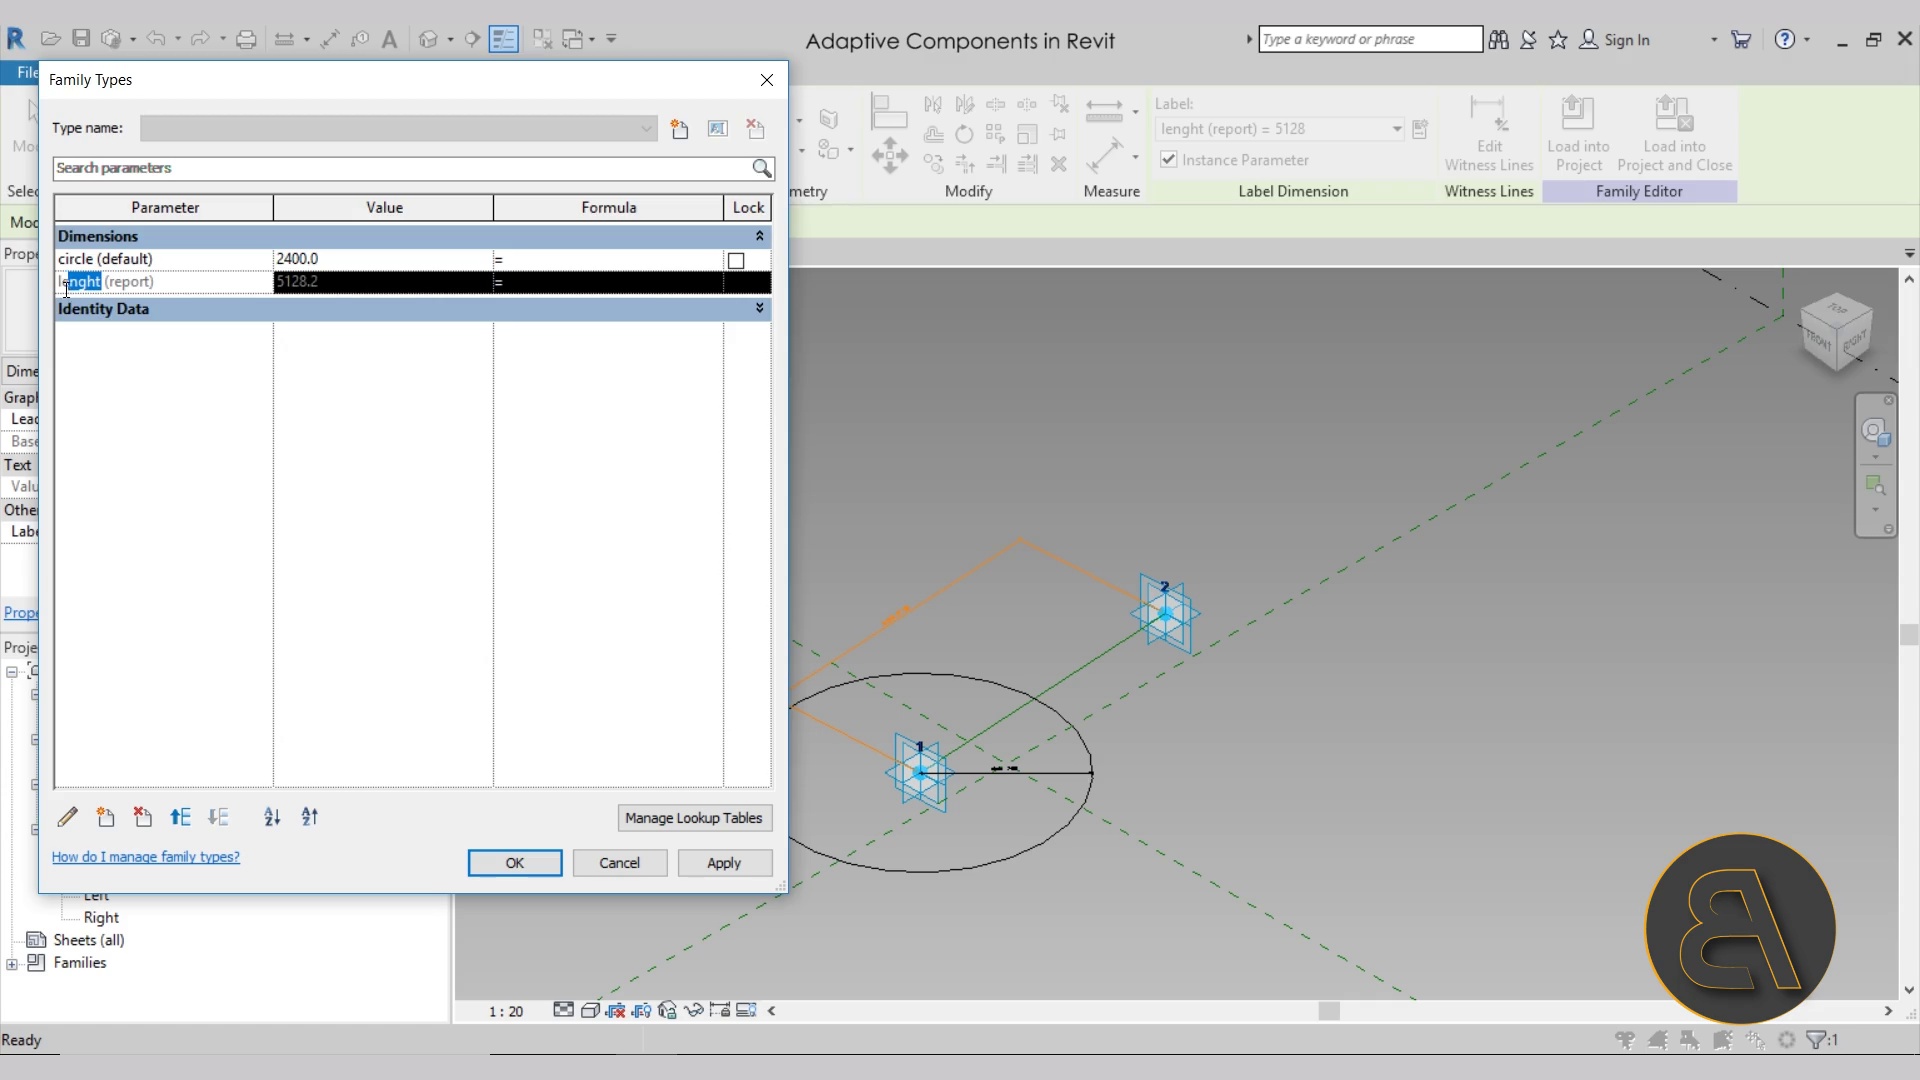 Adaptive Components in Revit